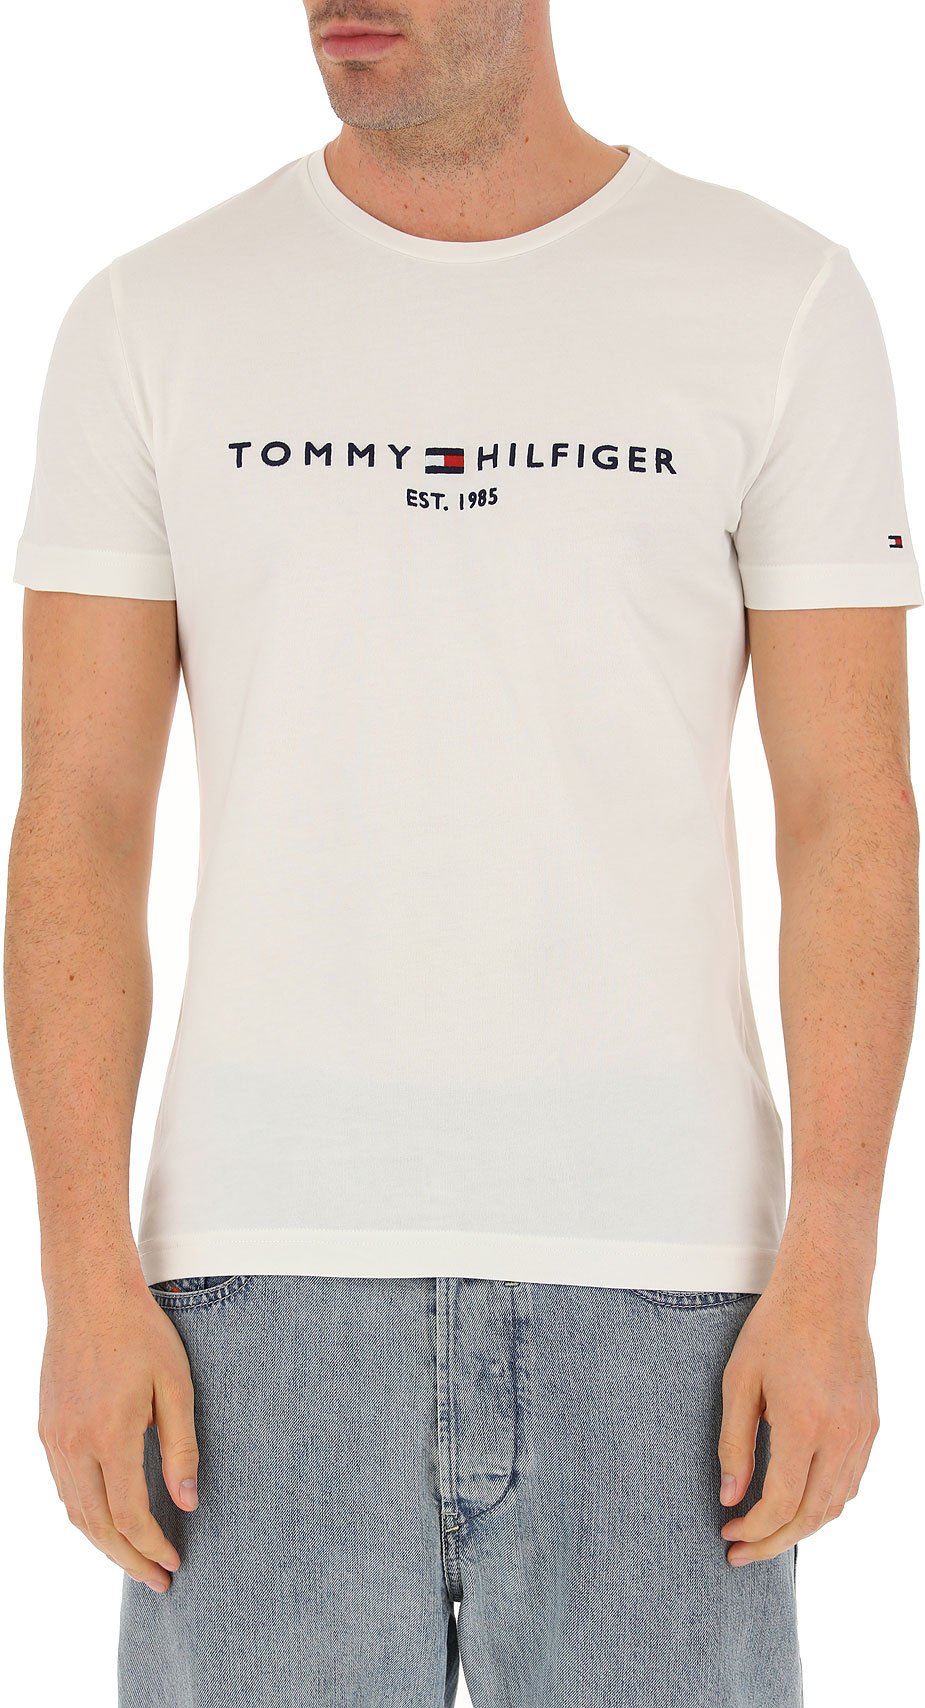 Ropa Para Hombres Tommy Hilfiger Detalle Modelo Mw0mw11465 118